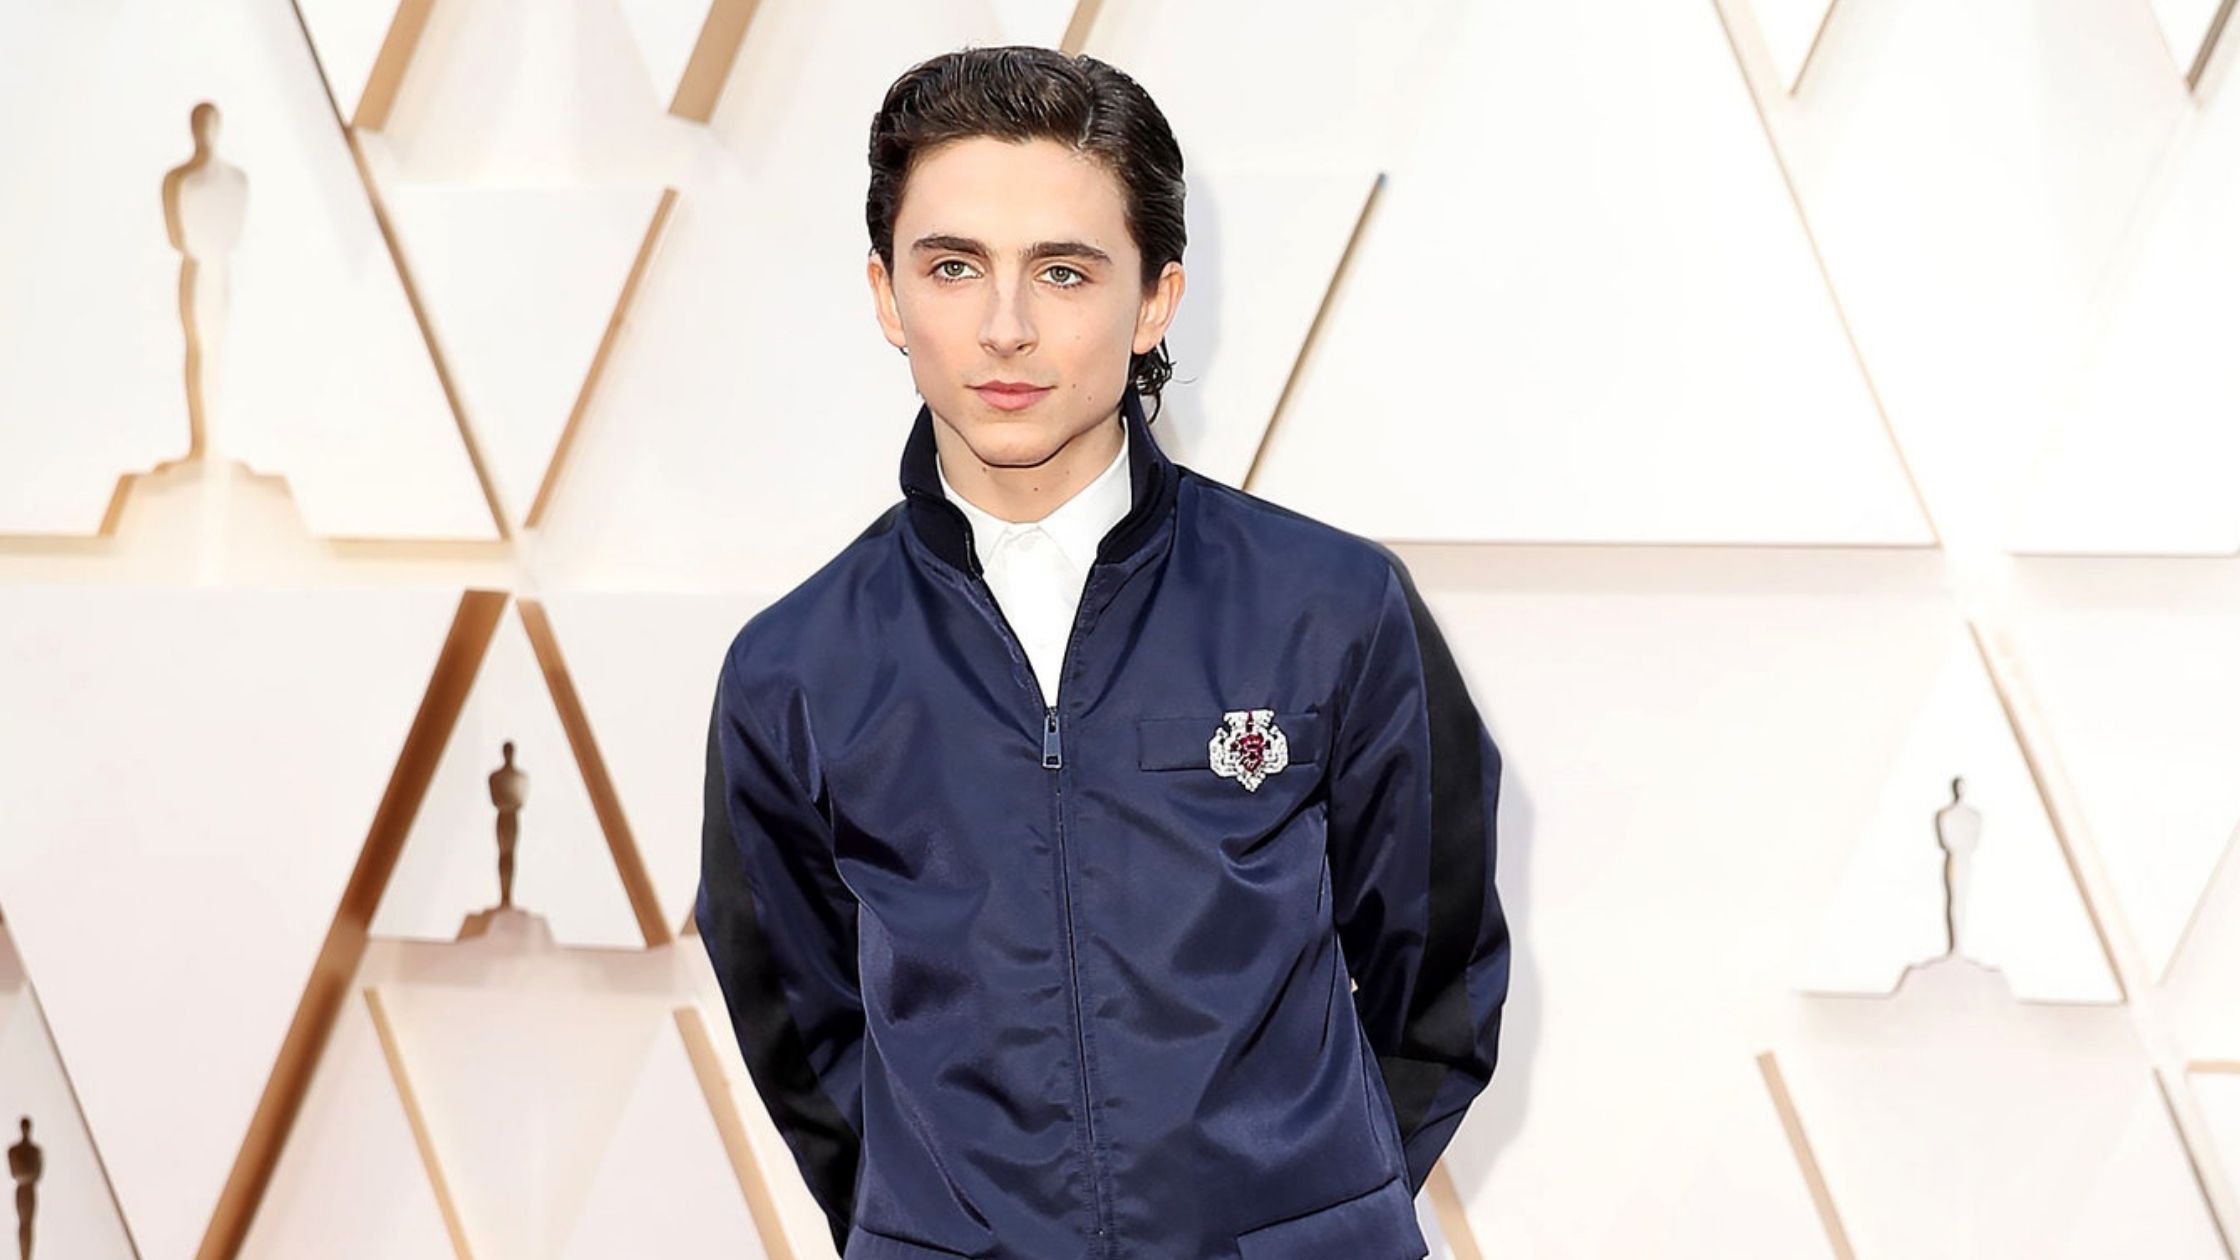 Timothee Chalamet set to play Willy Wonka